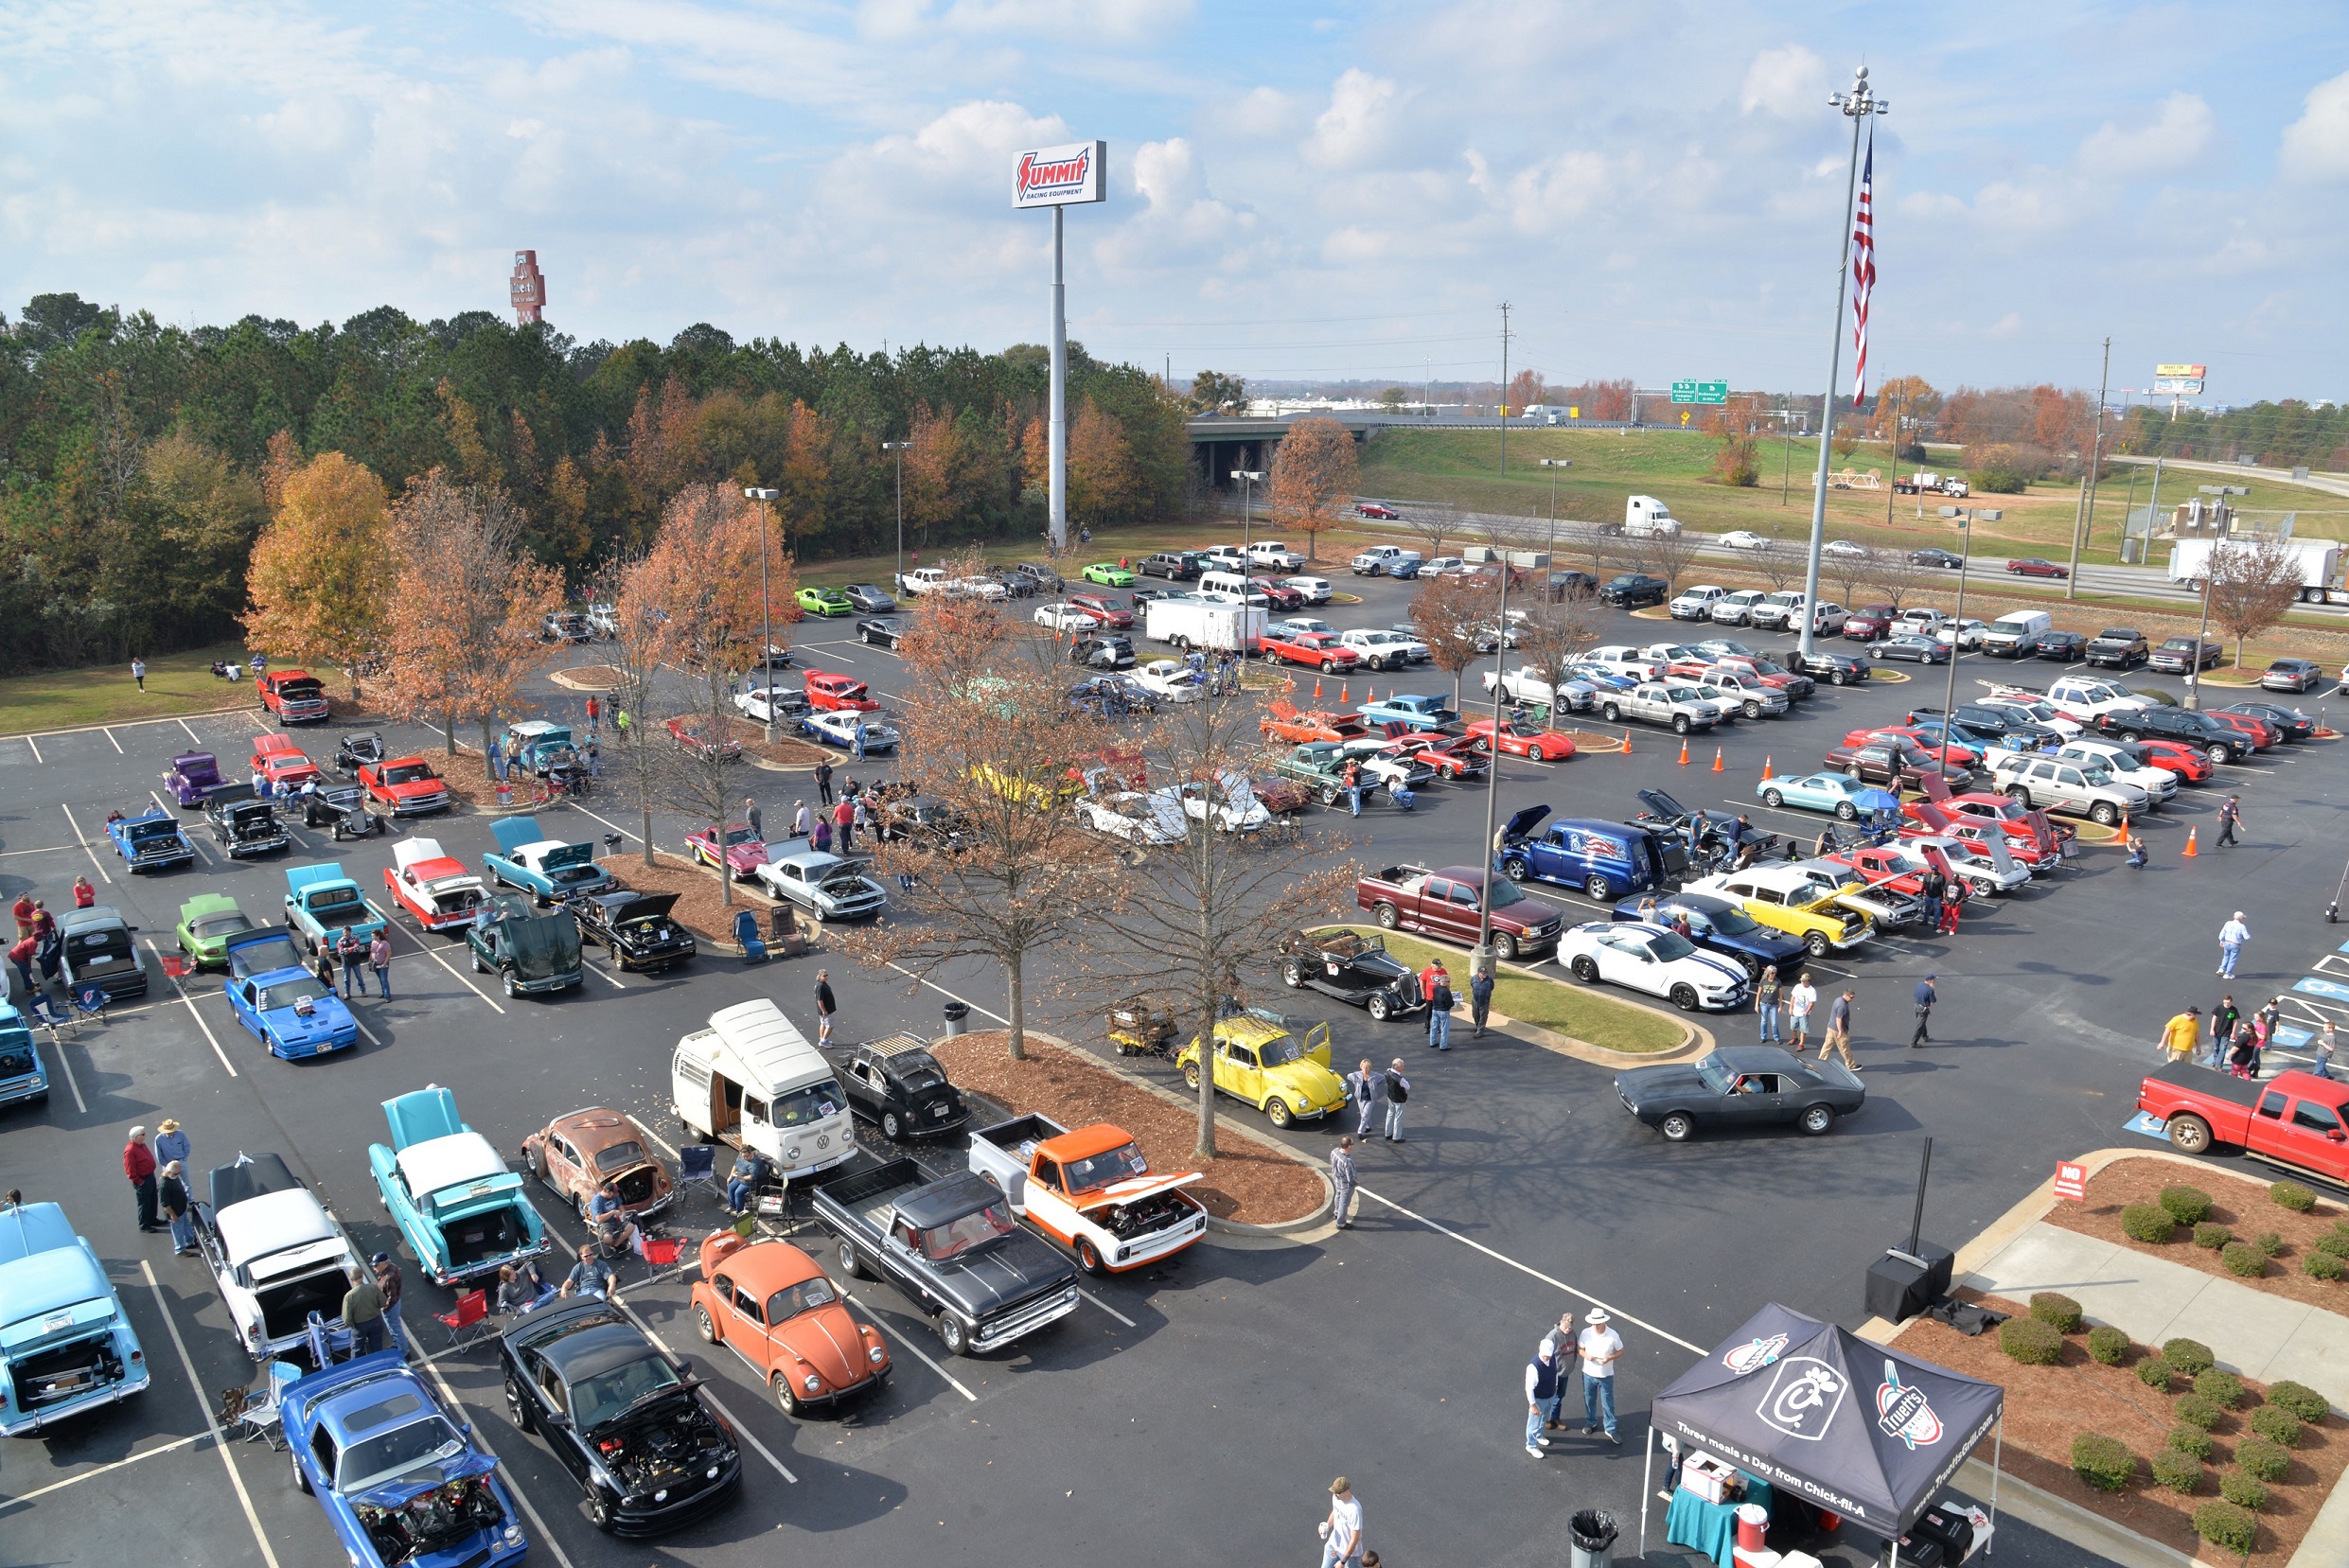 Toys for Tots Cruise In Arial